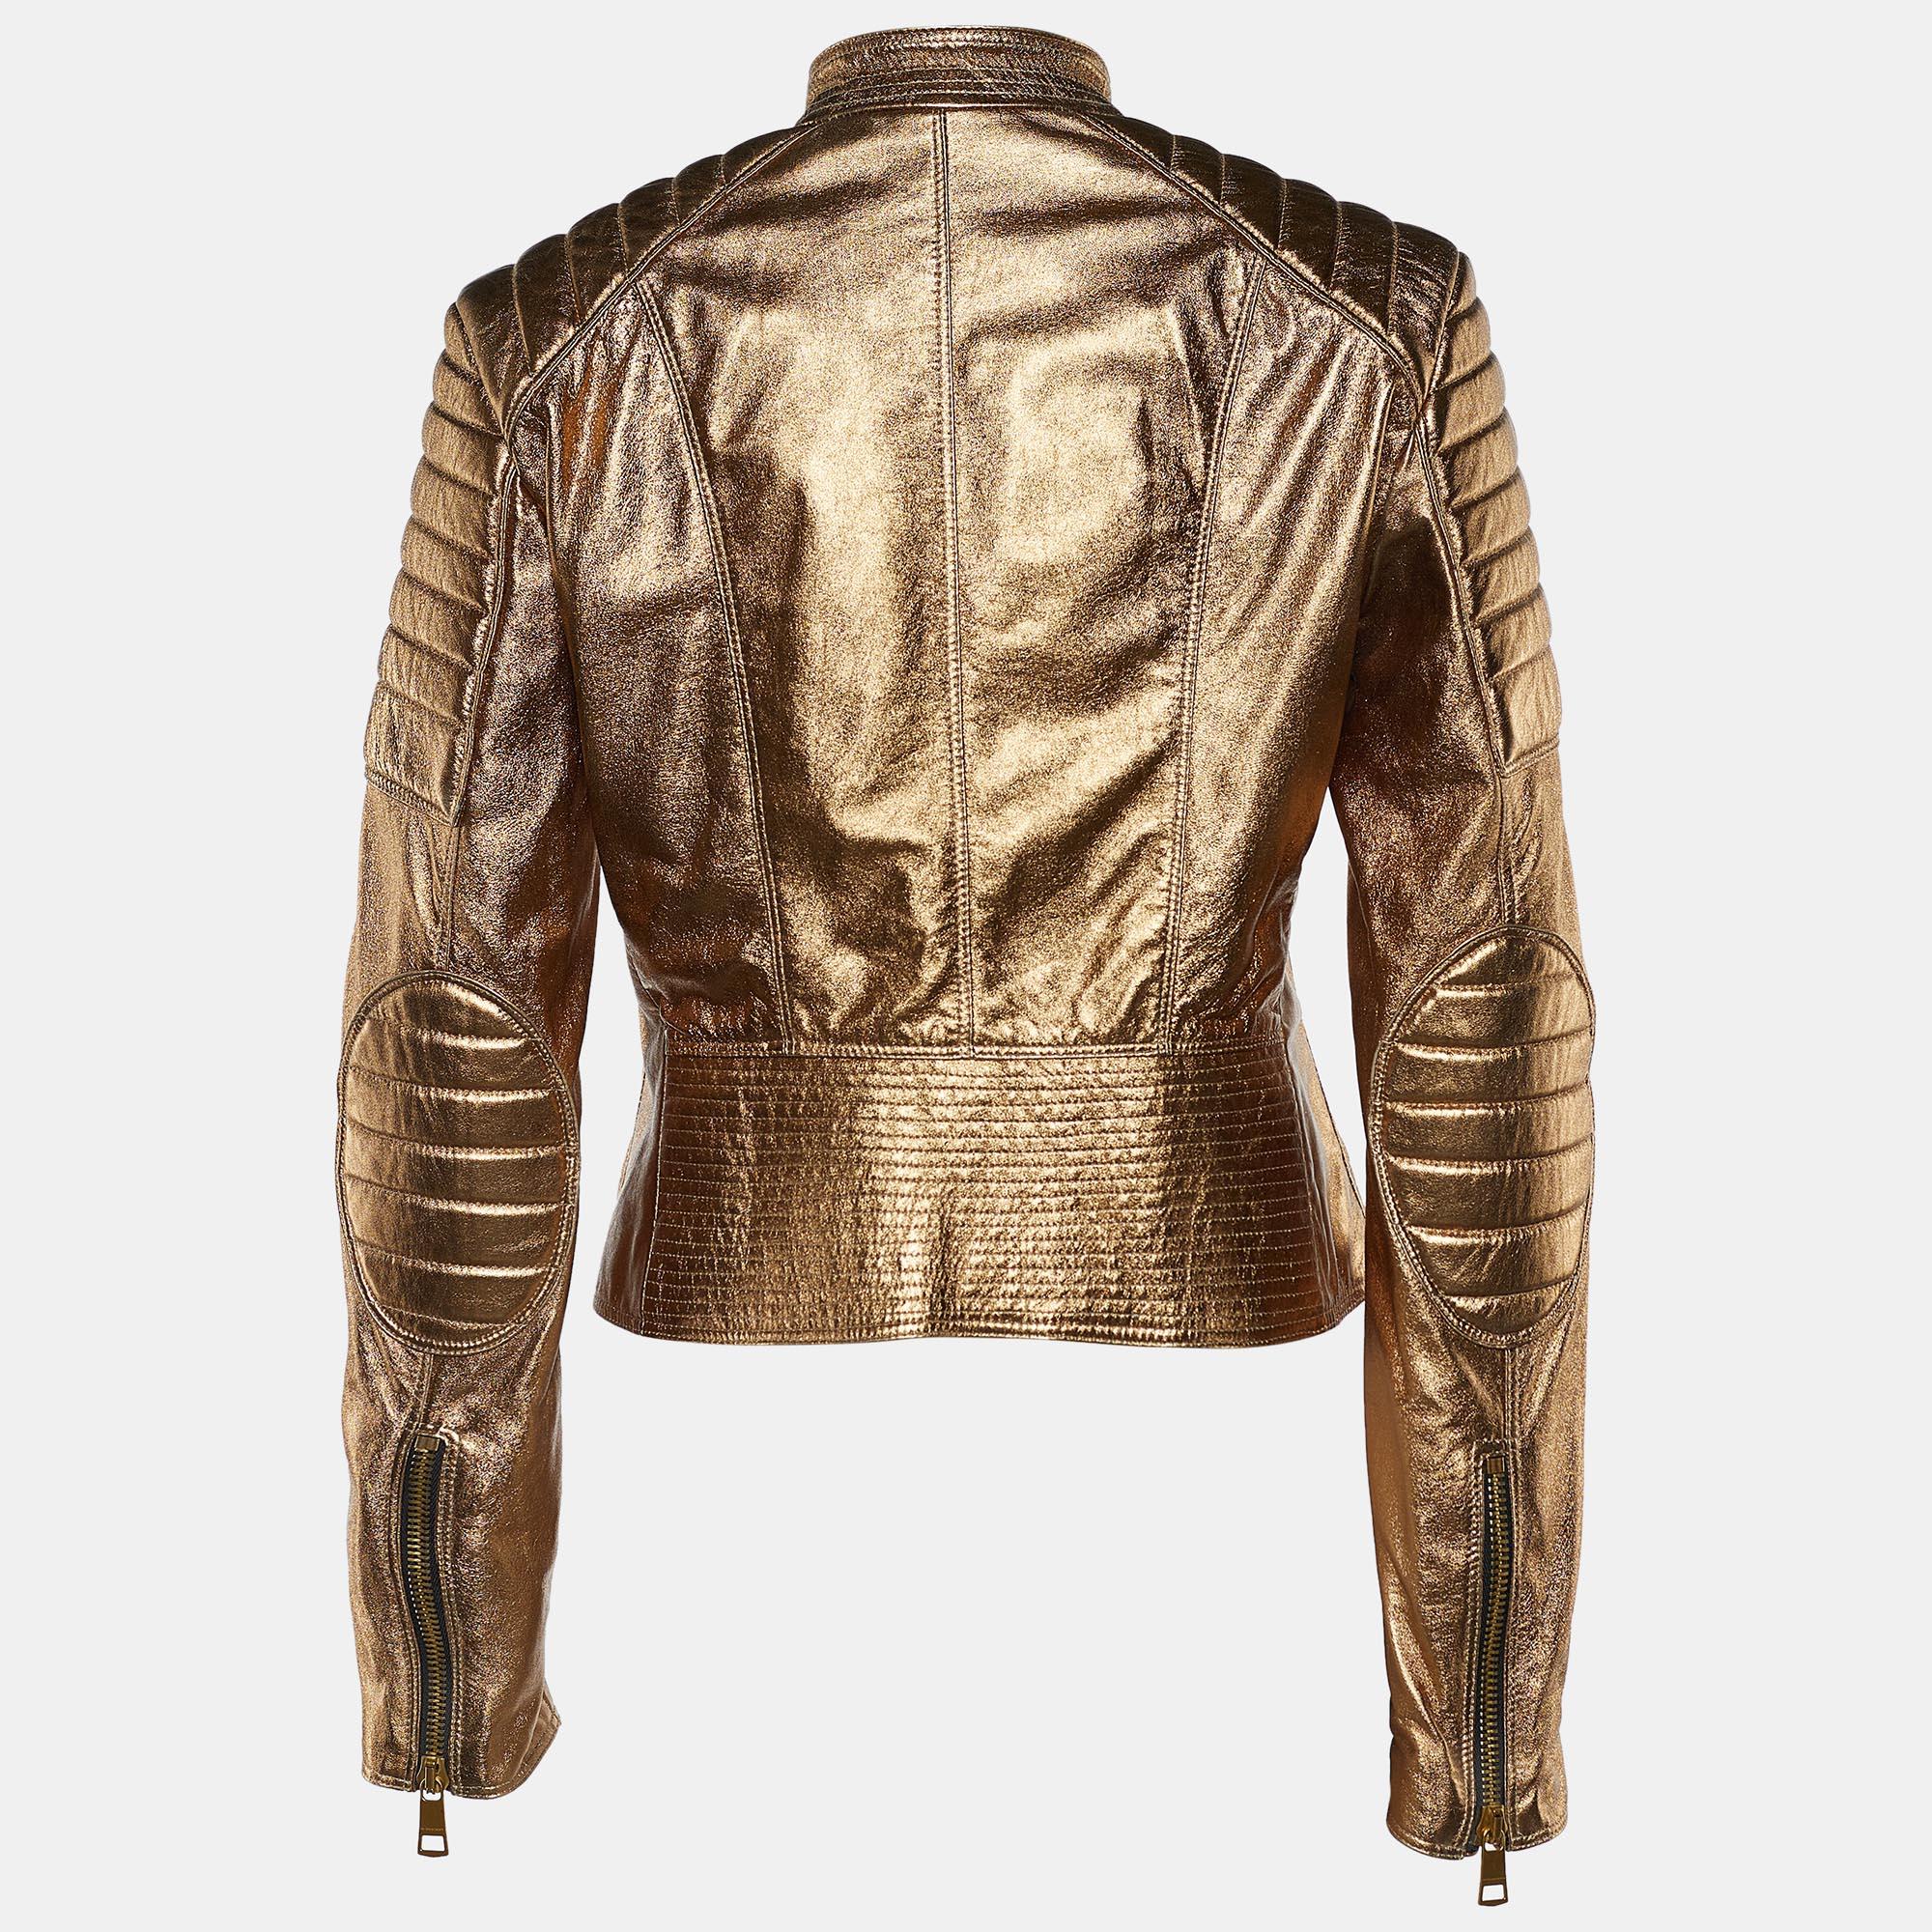 Bring your style sense into the limelight with this jacket from Burberry. Dressed in metallic-gold leather, this jacket delivers a stunning element to your look while granting you comfort. It is equipped with a zipper and three functional pockets.